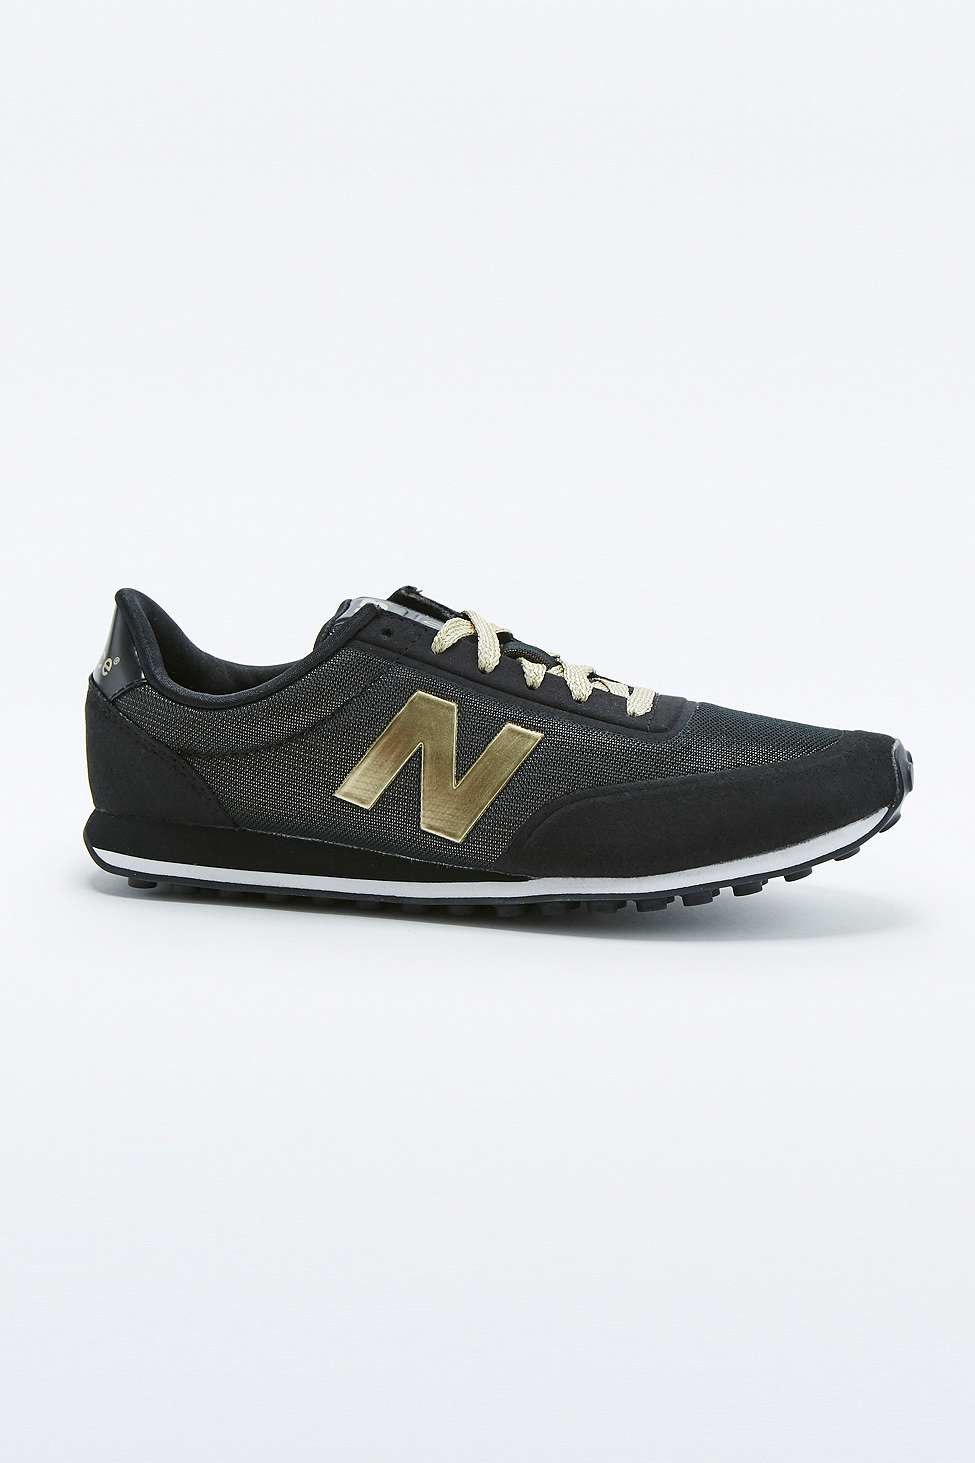 nb 410 black and gold